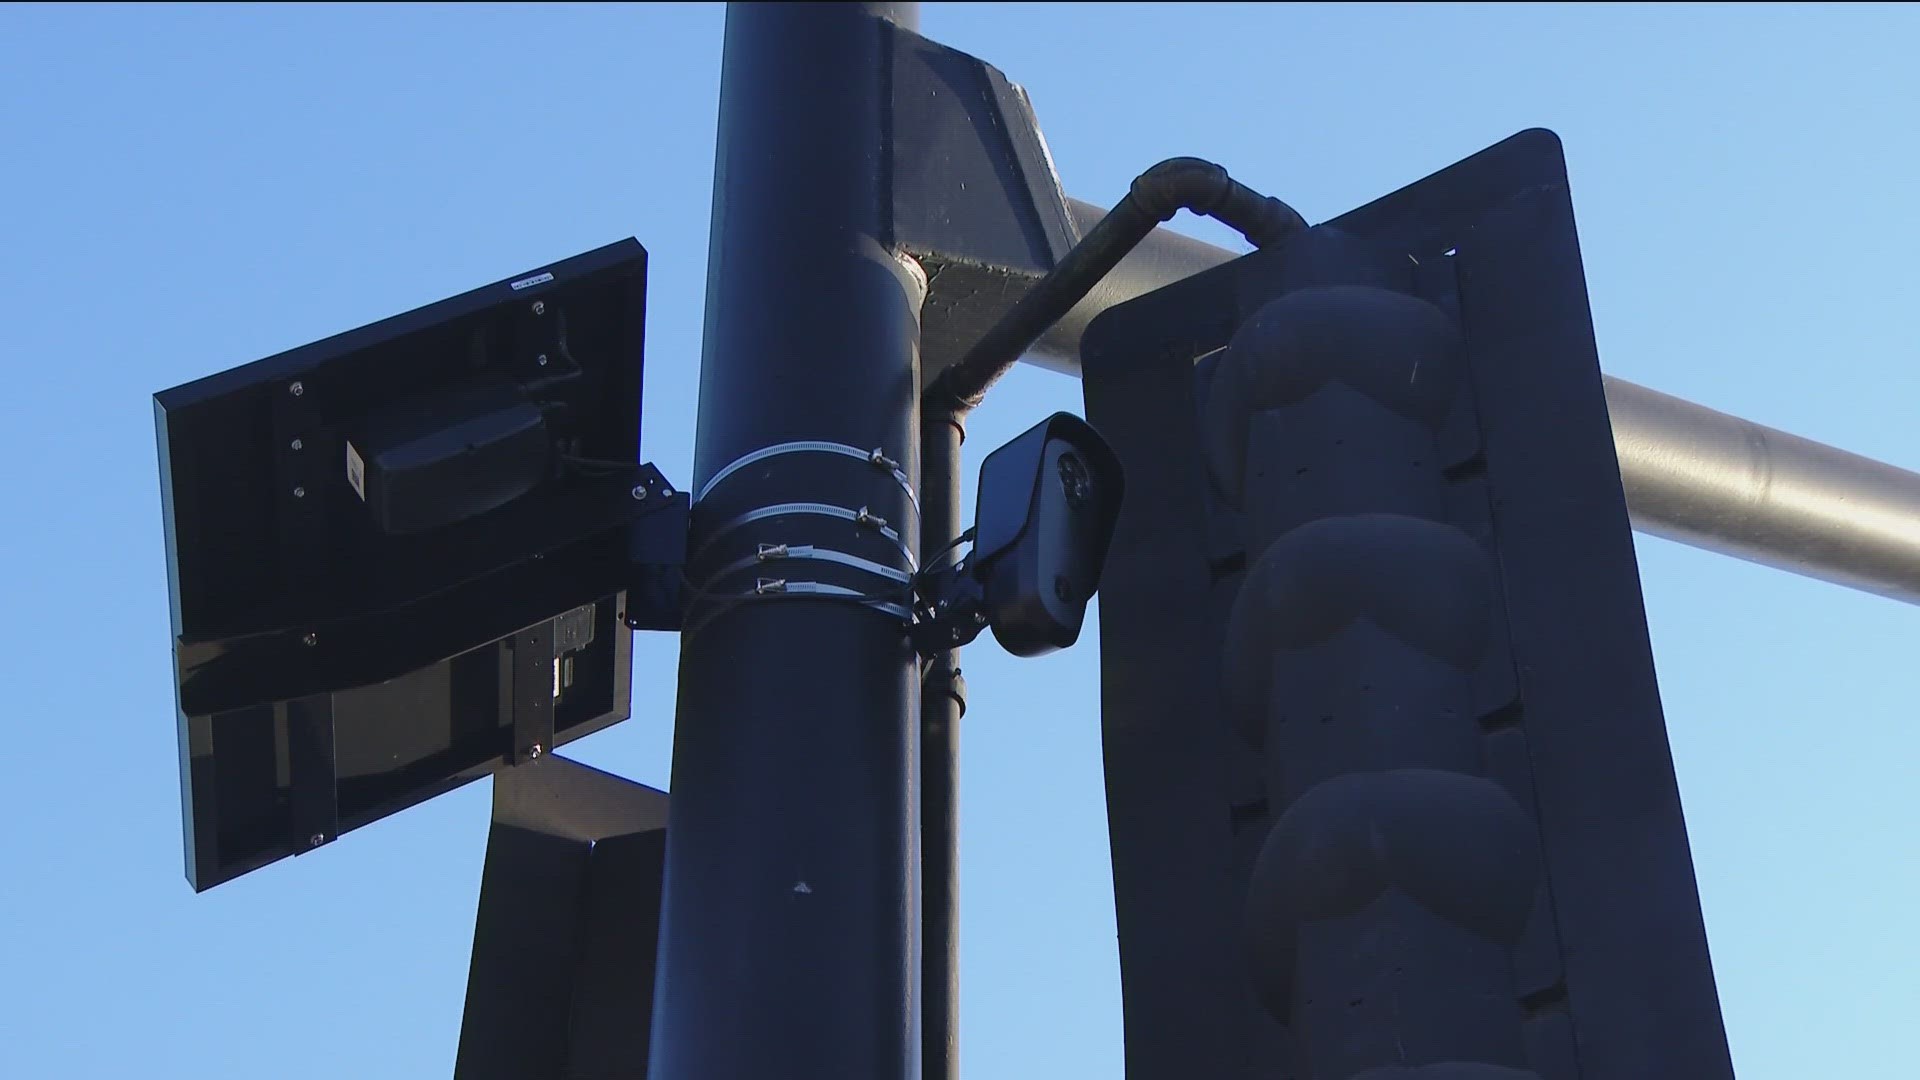 La Mesa is the latest city to approve the implementation of automated license plate readers after a 4-1 vote at a city council meeting Tuesday.